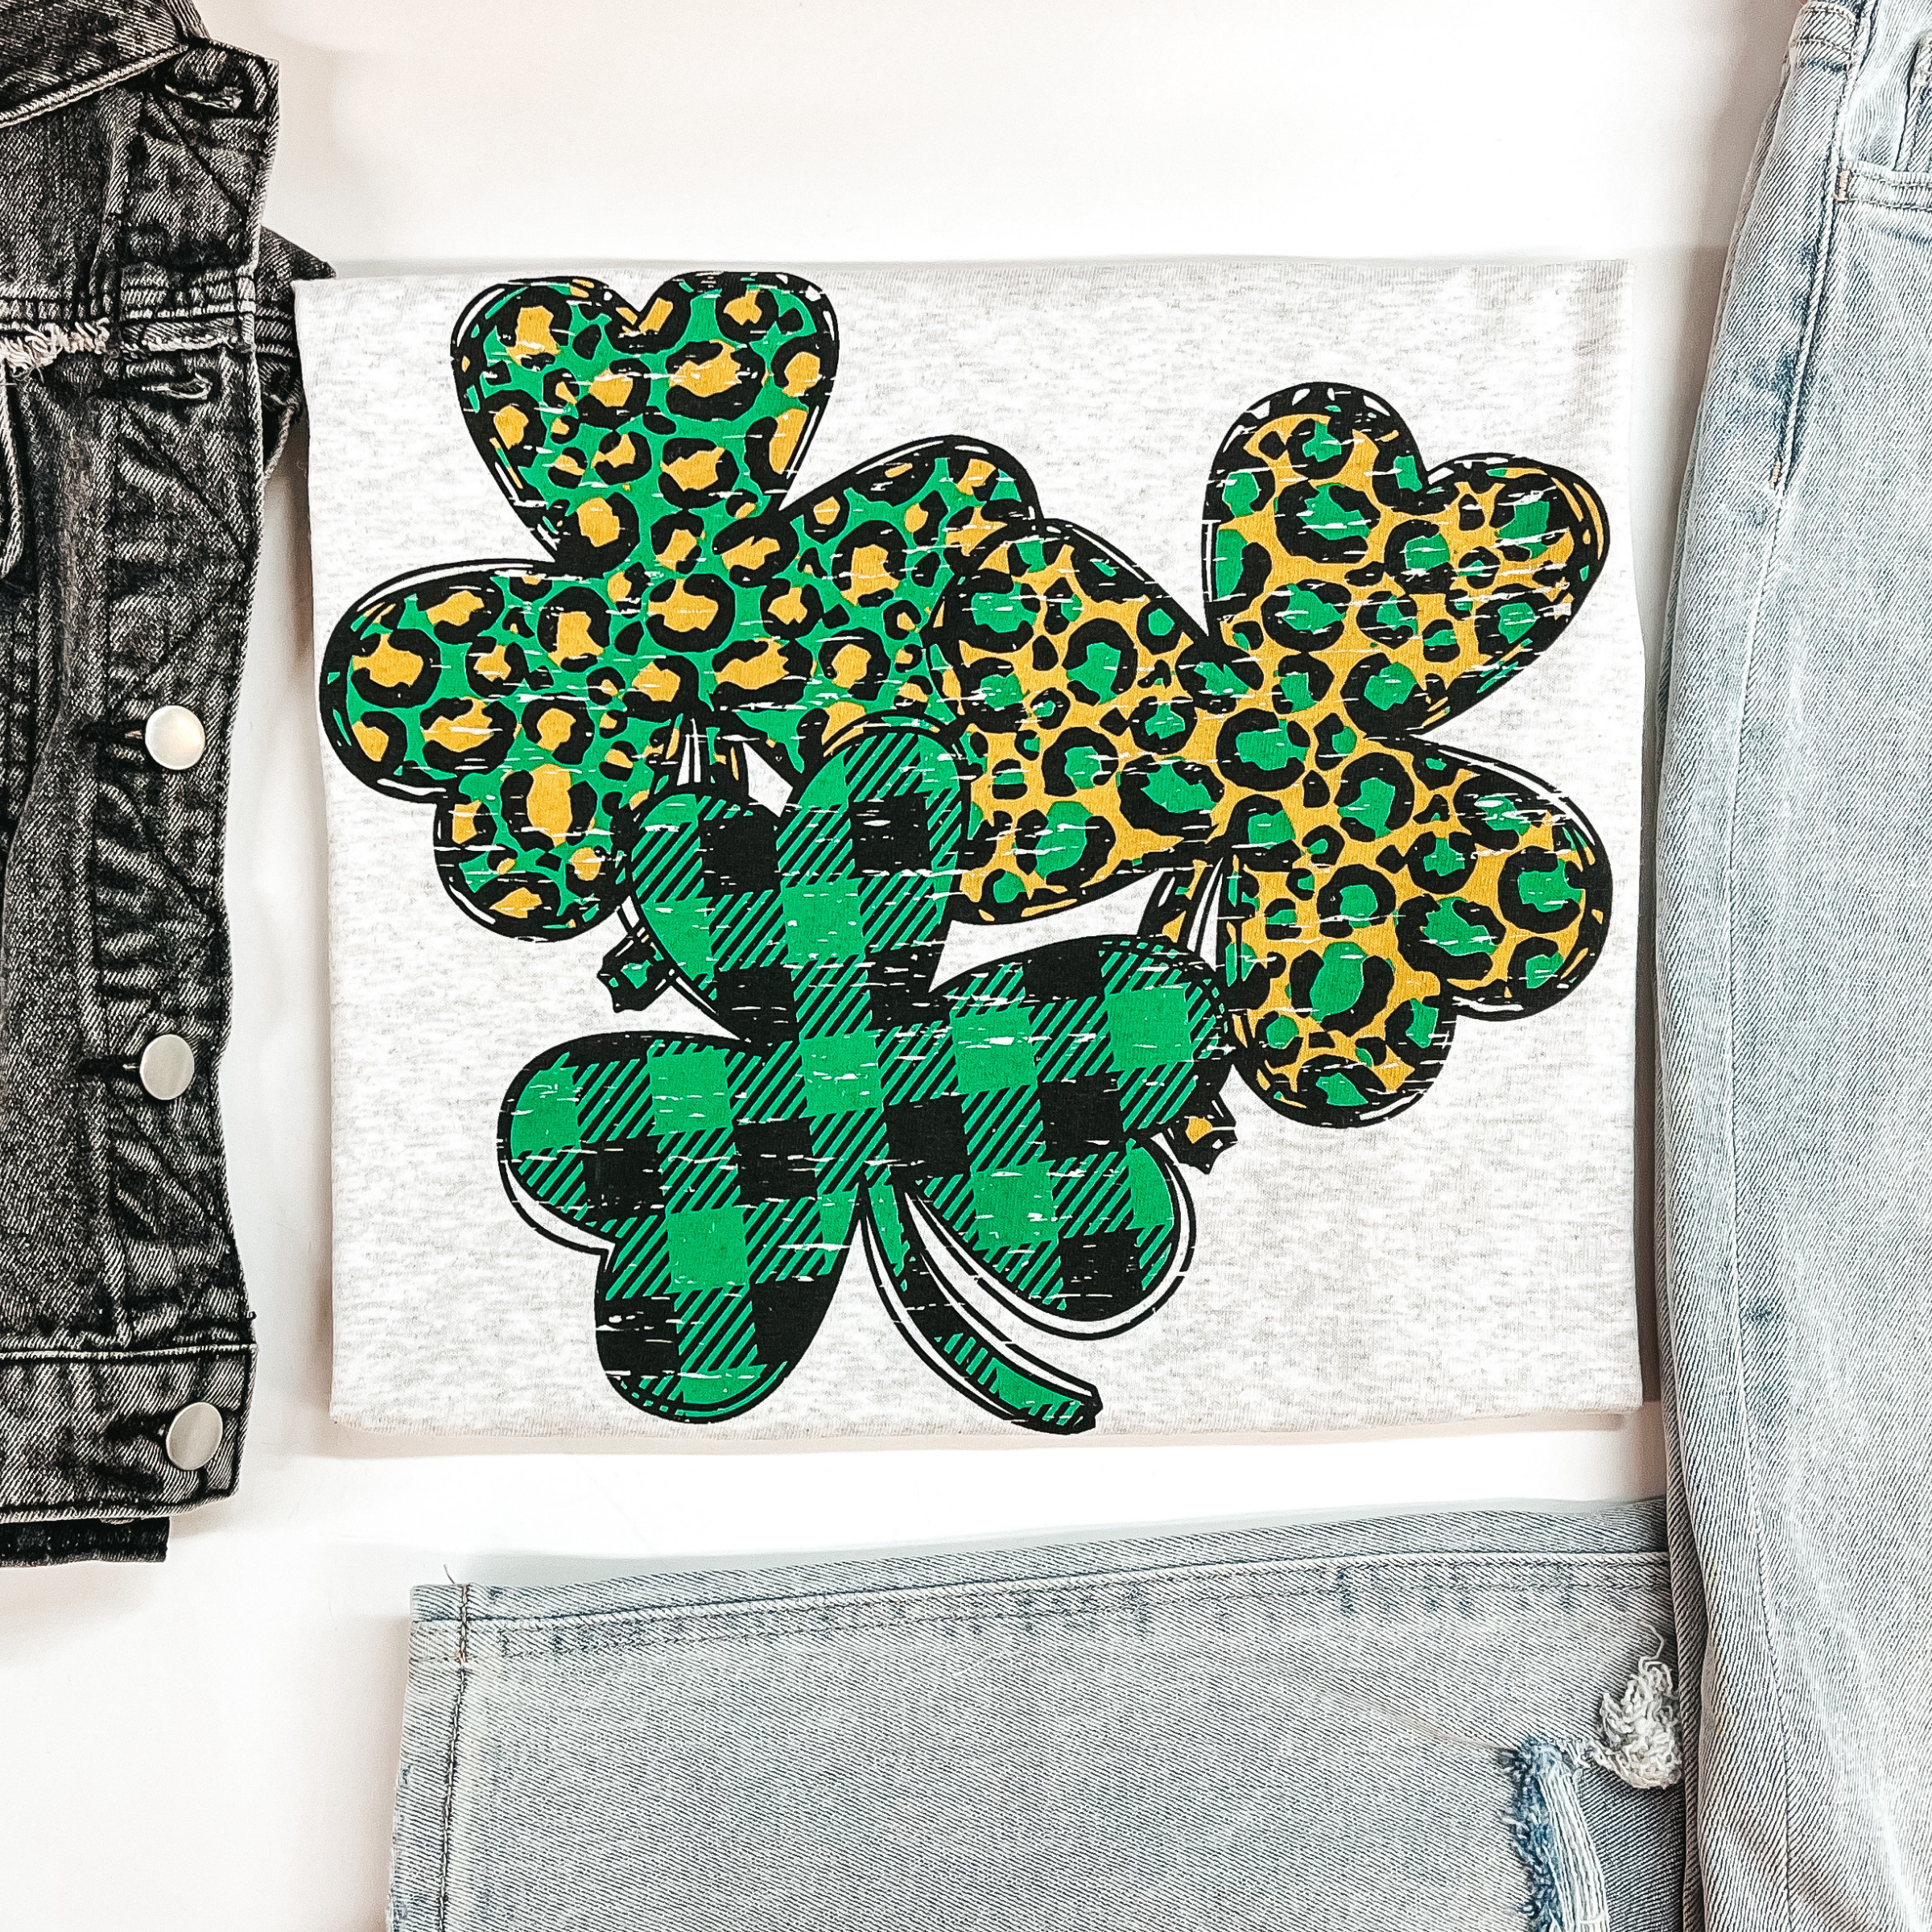 A grey graphic tee folded to expose the graphic of leopard print and plaid clovers.